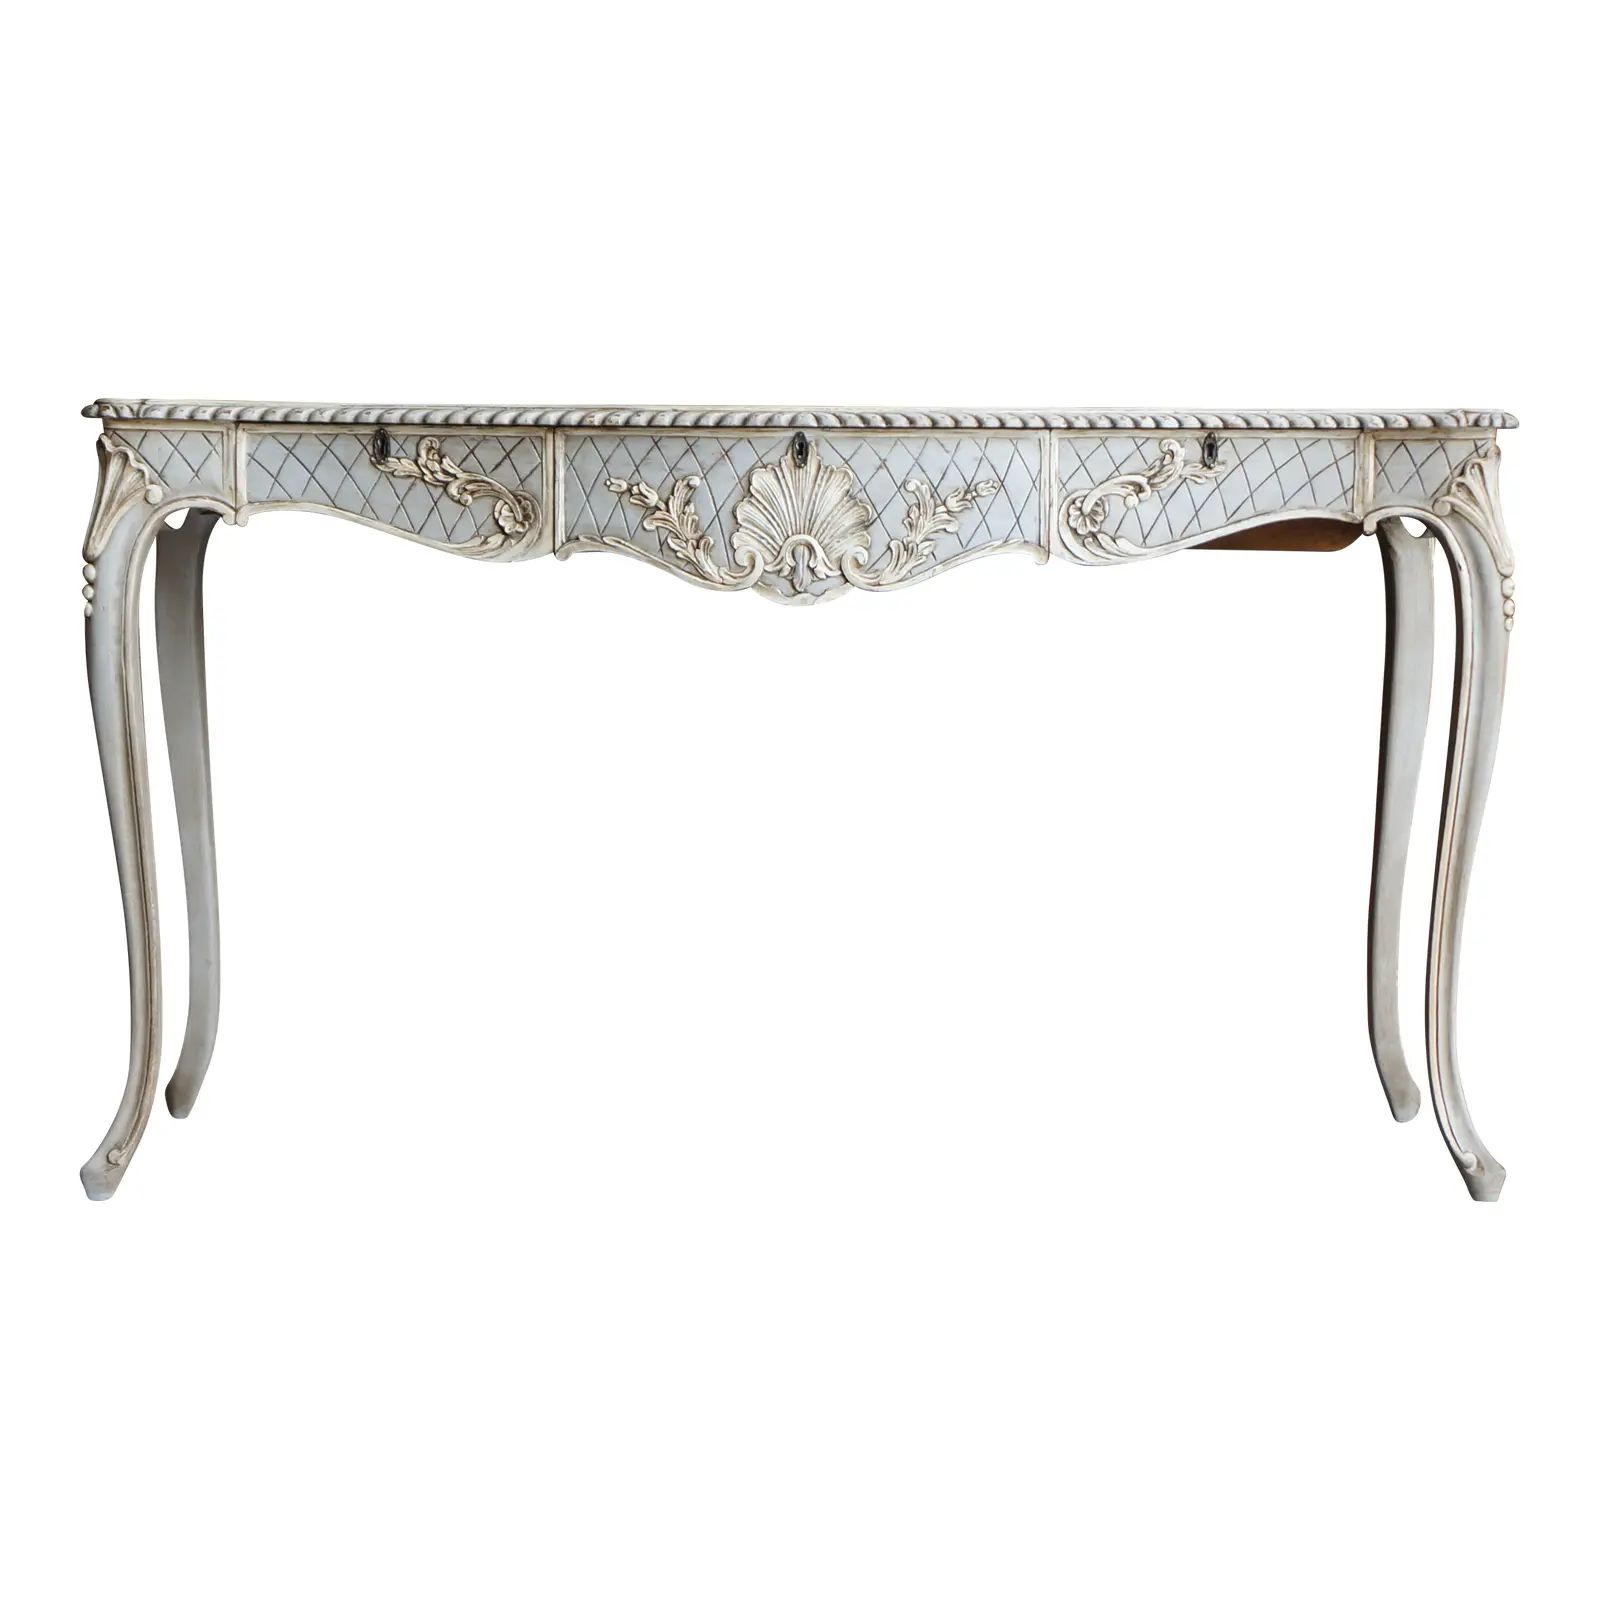 Hand Painted French Provincial Style Console Table | Chairish